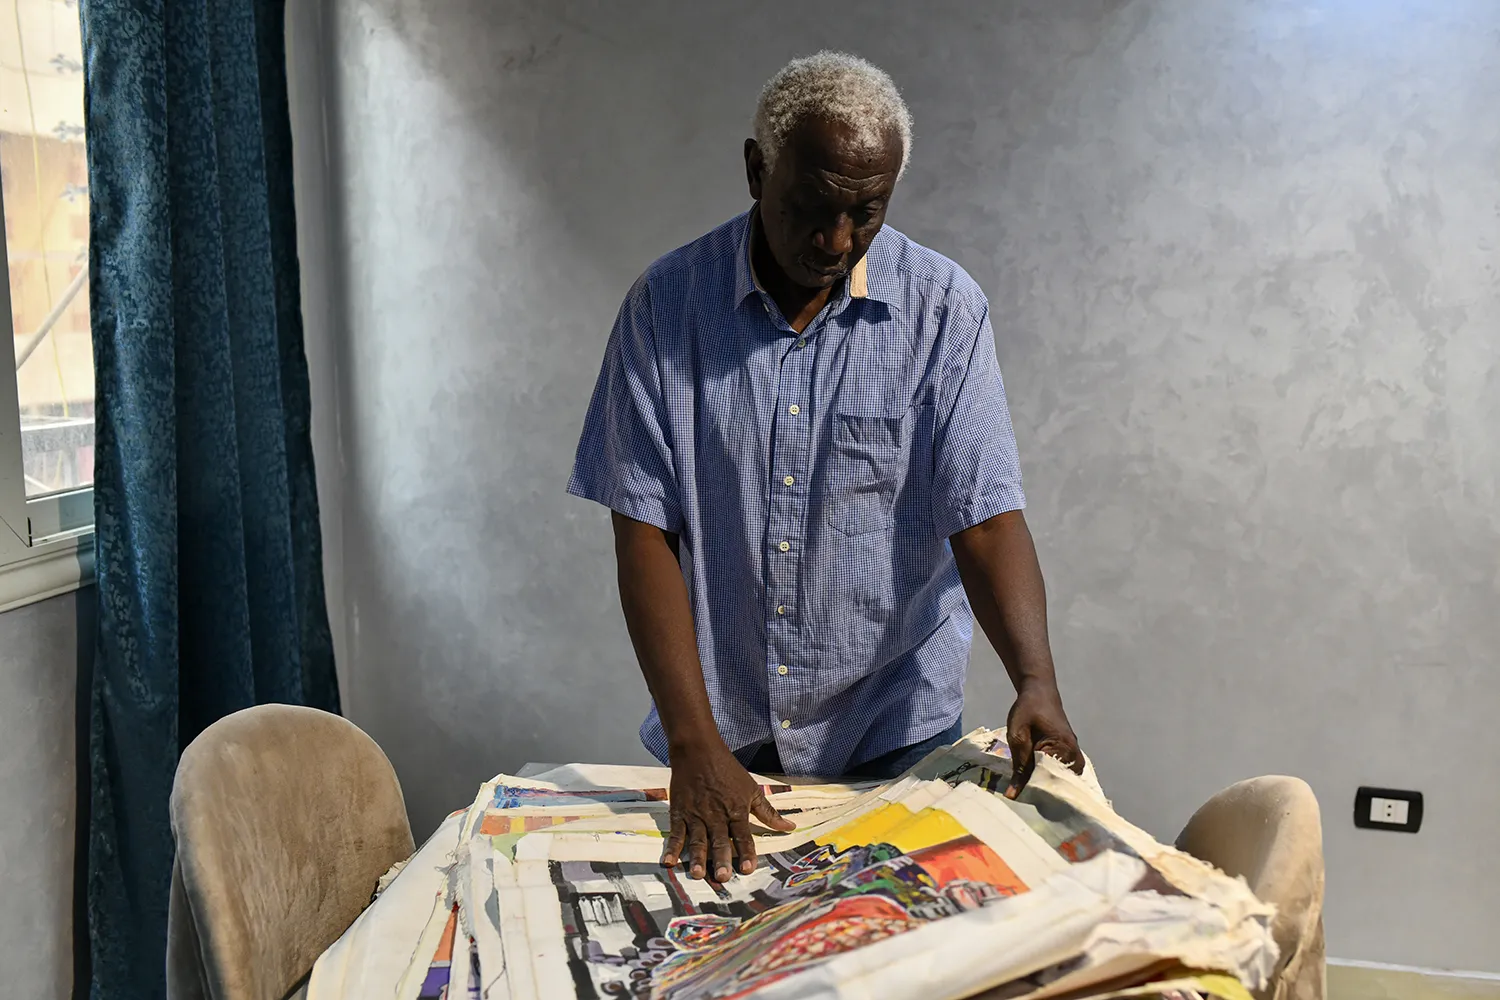 An artist looks down at a stack of his paintings.